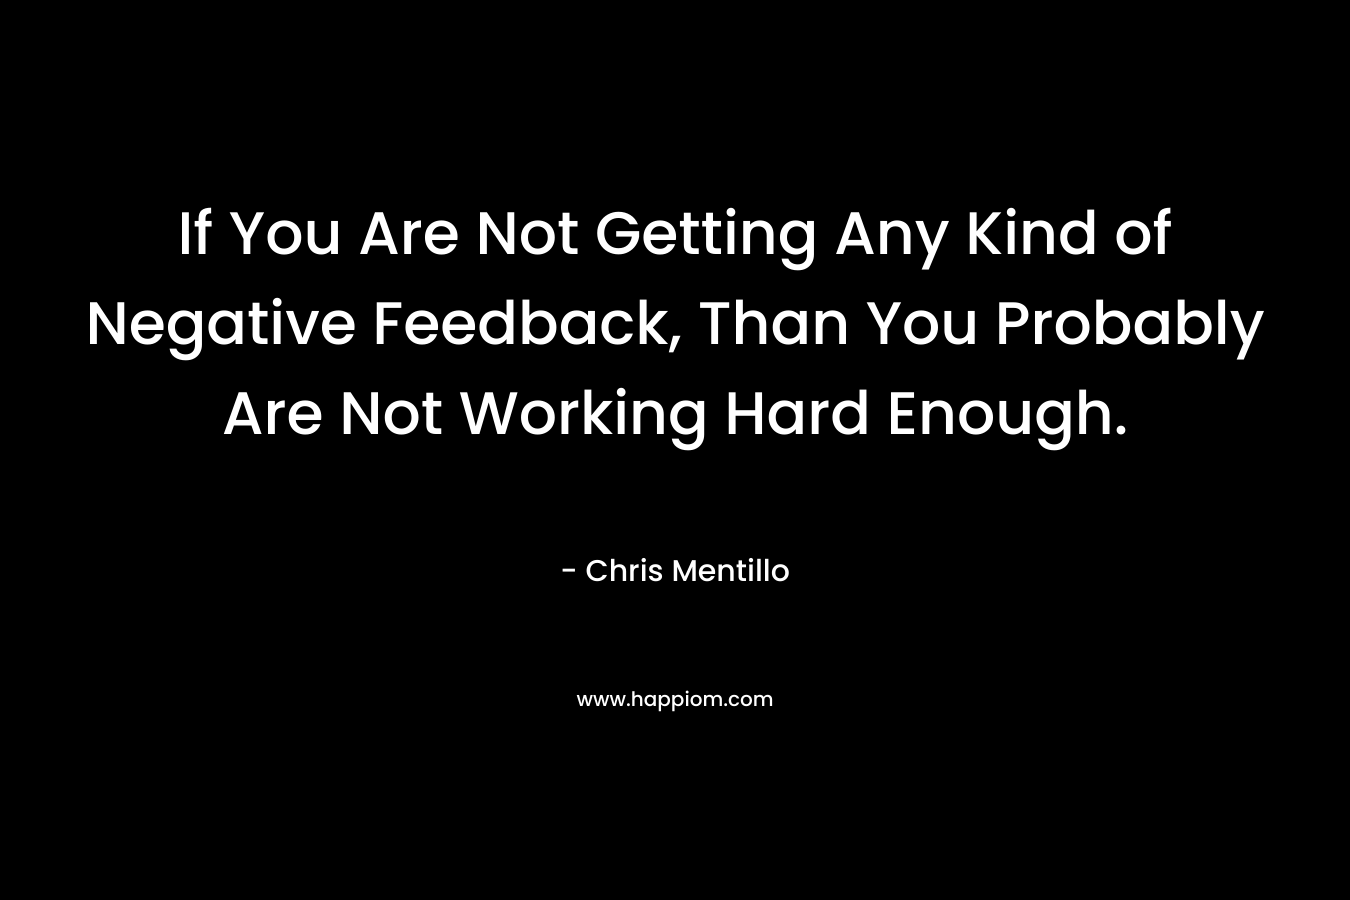 If You Are Not Getting Any Kind of Negative Feedback, Than You Probably Are Not Working Hard Enough. – Chris Mentillo